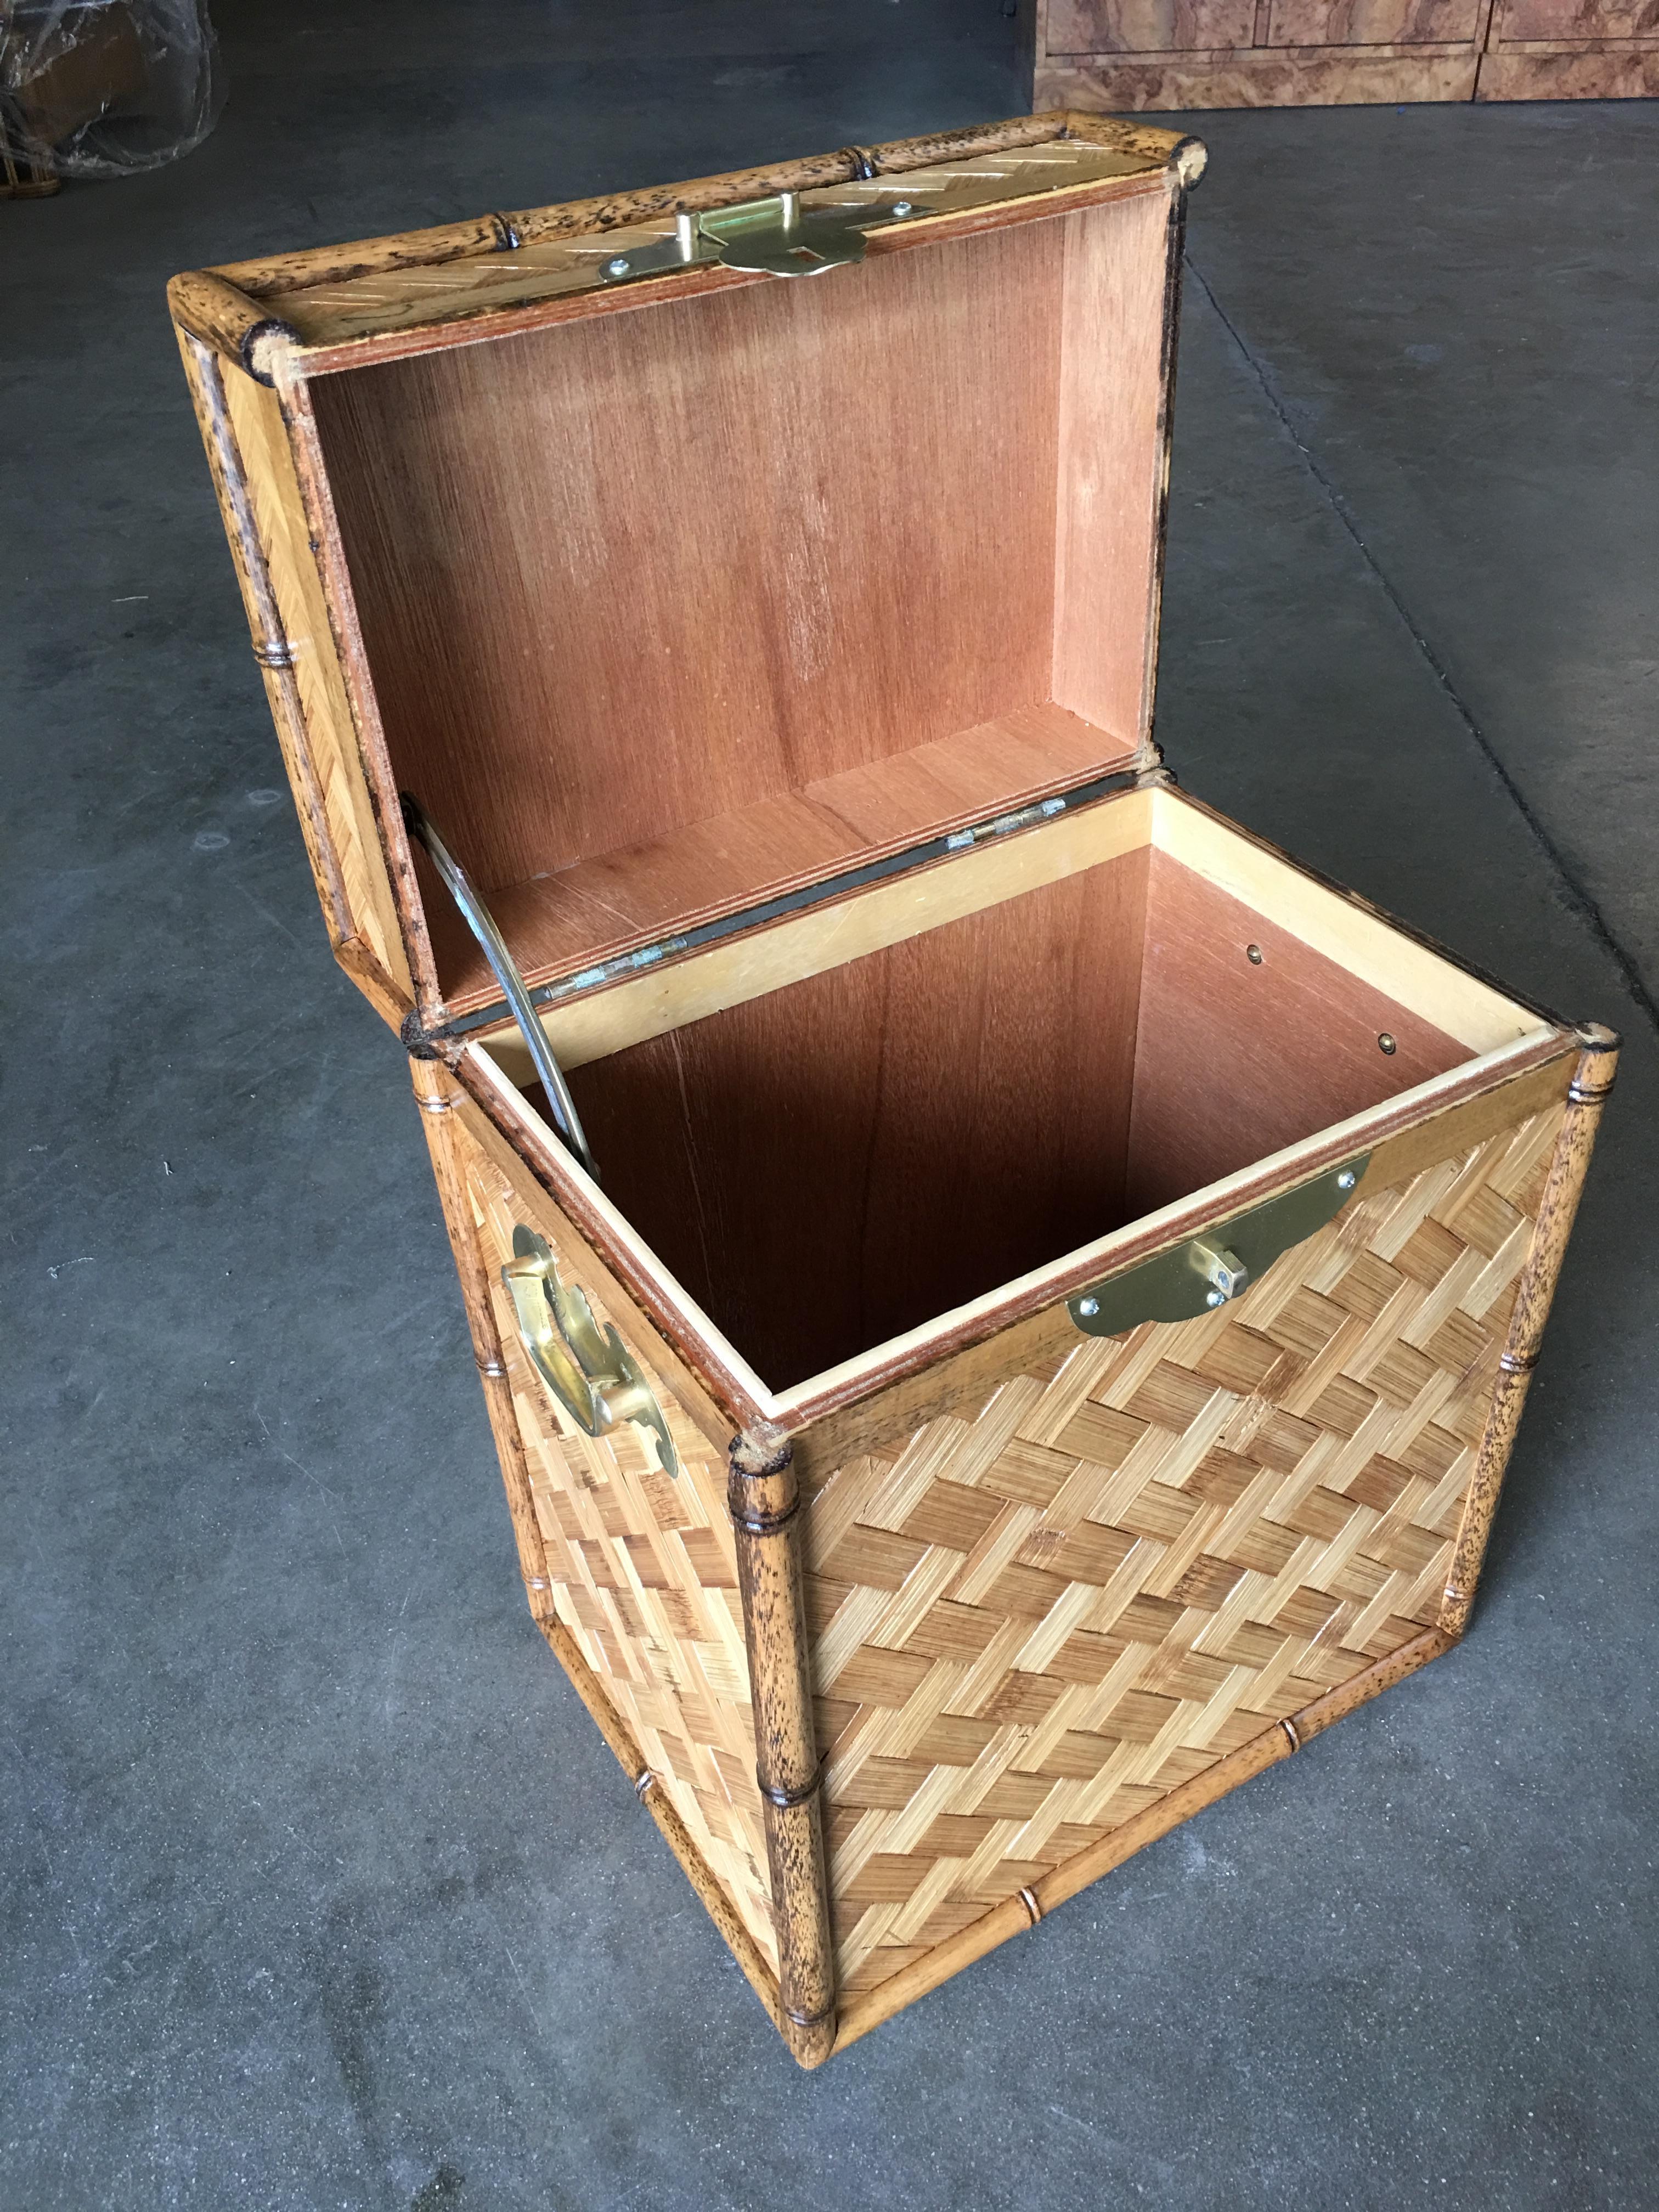 This bamboo storage trunk with woven wicker cover and solid cedar inner walls also comes with a unique copper face lock in the front. Restored to new for you. All rattan, bamboo and wicker furniture has been painstakingly refurbished to the highest